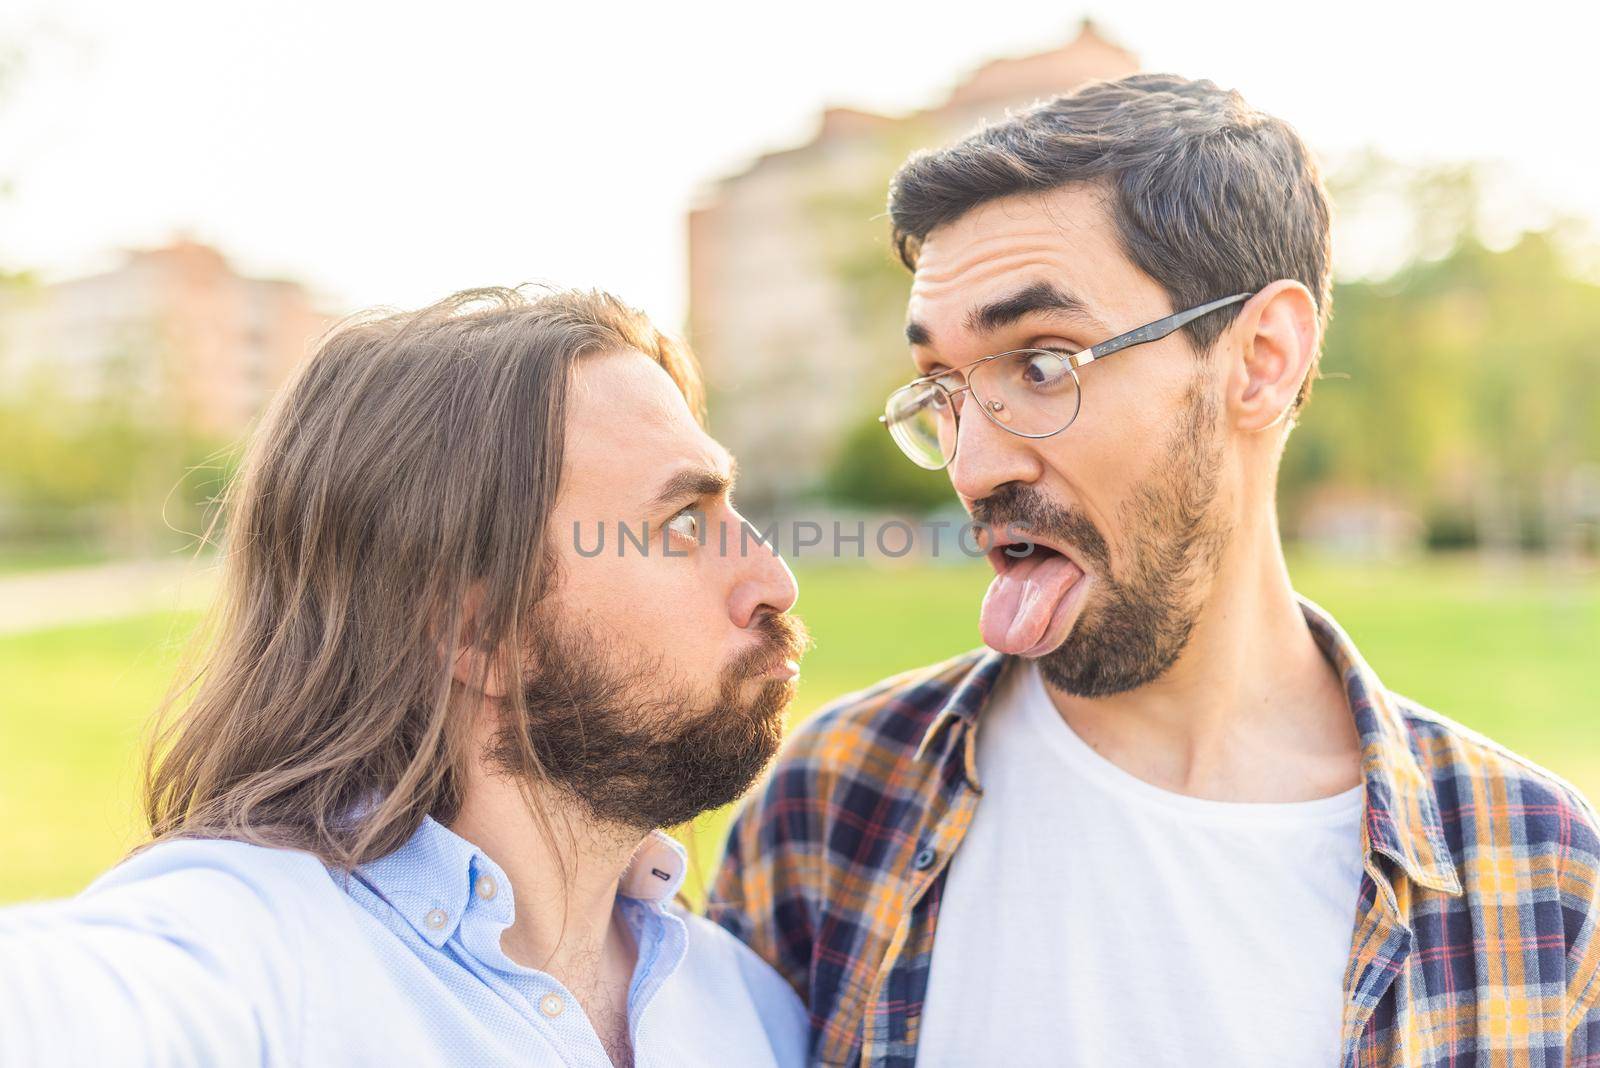 Front view of a funny gay couple looking at each other and making grimaces in the park.